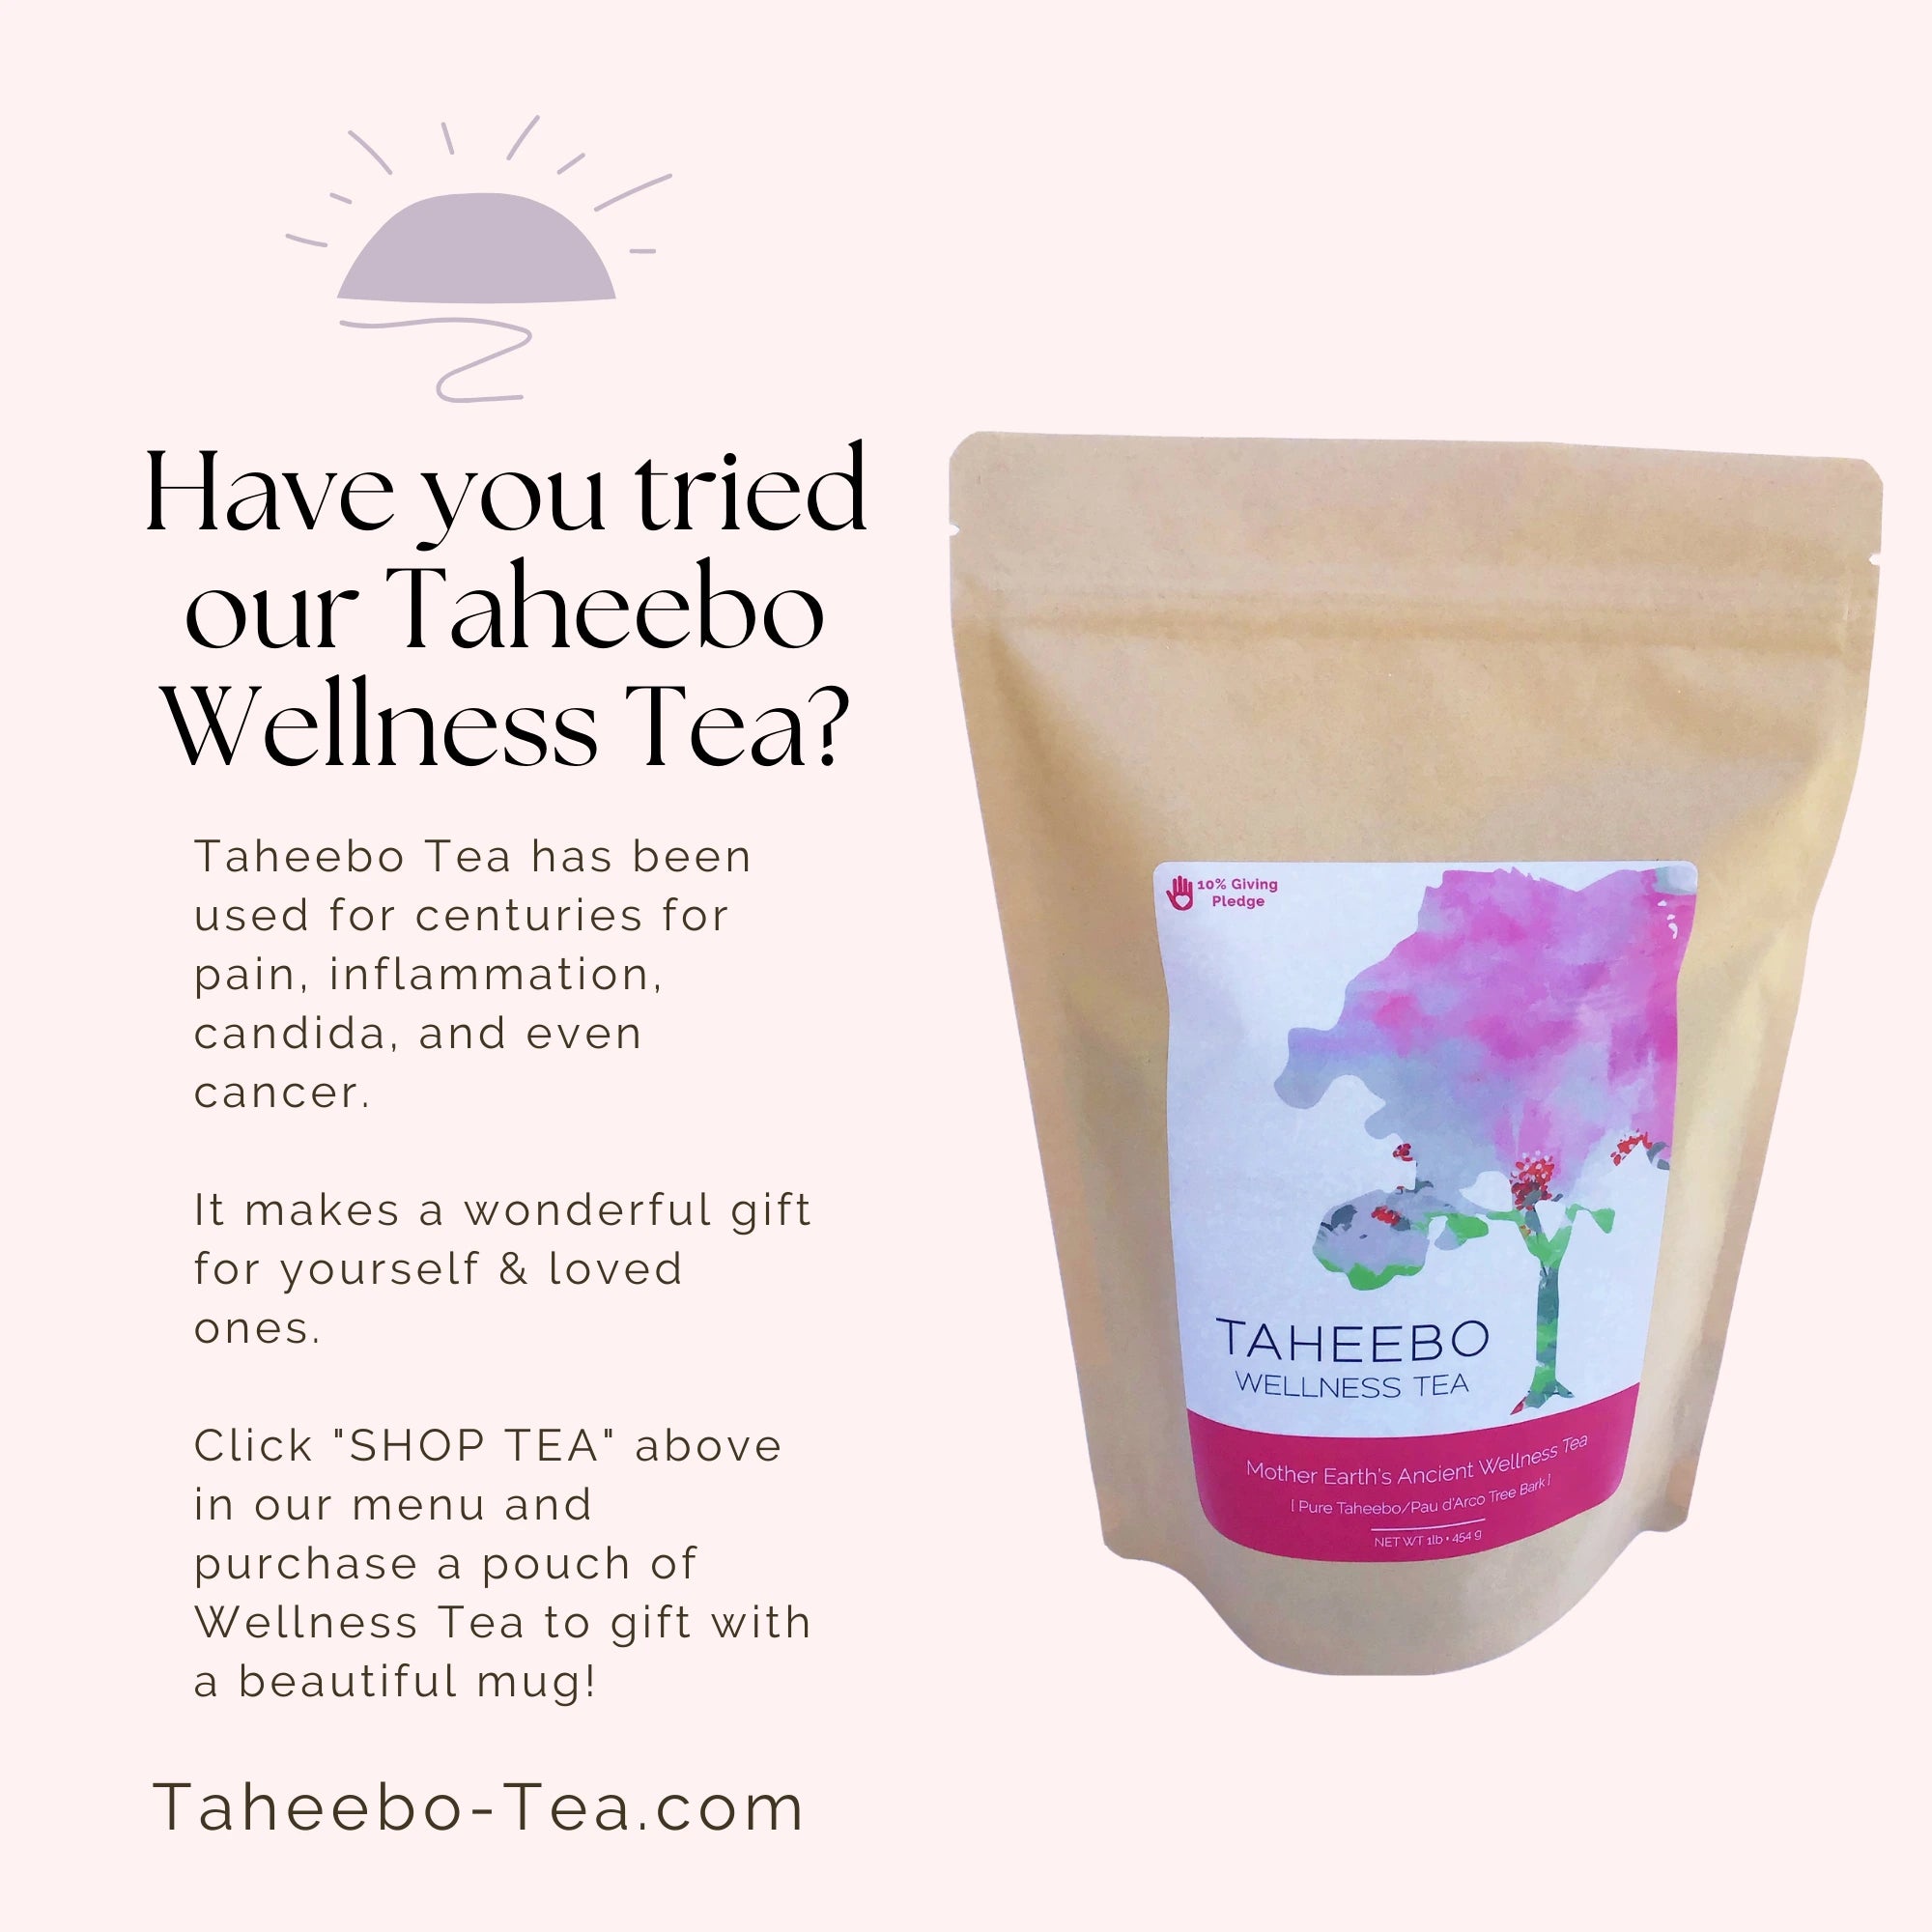 Have you tried our Taheebo Wellness Tea? It would look great in your new mug!